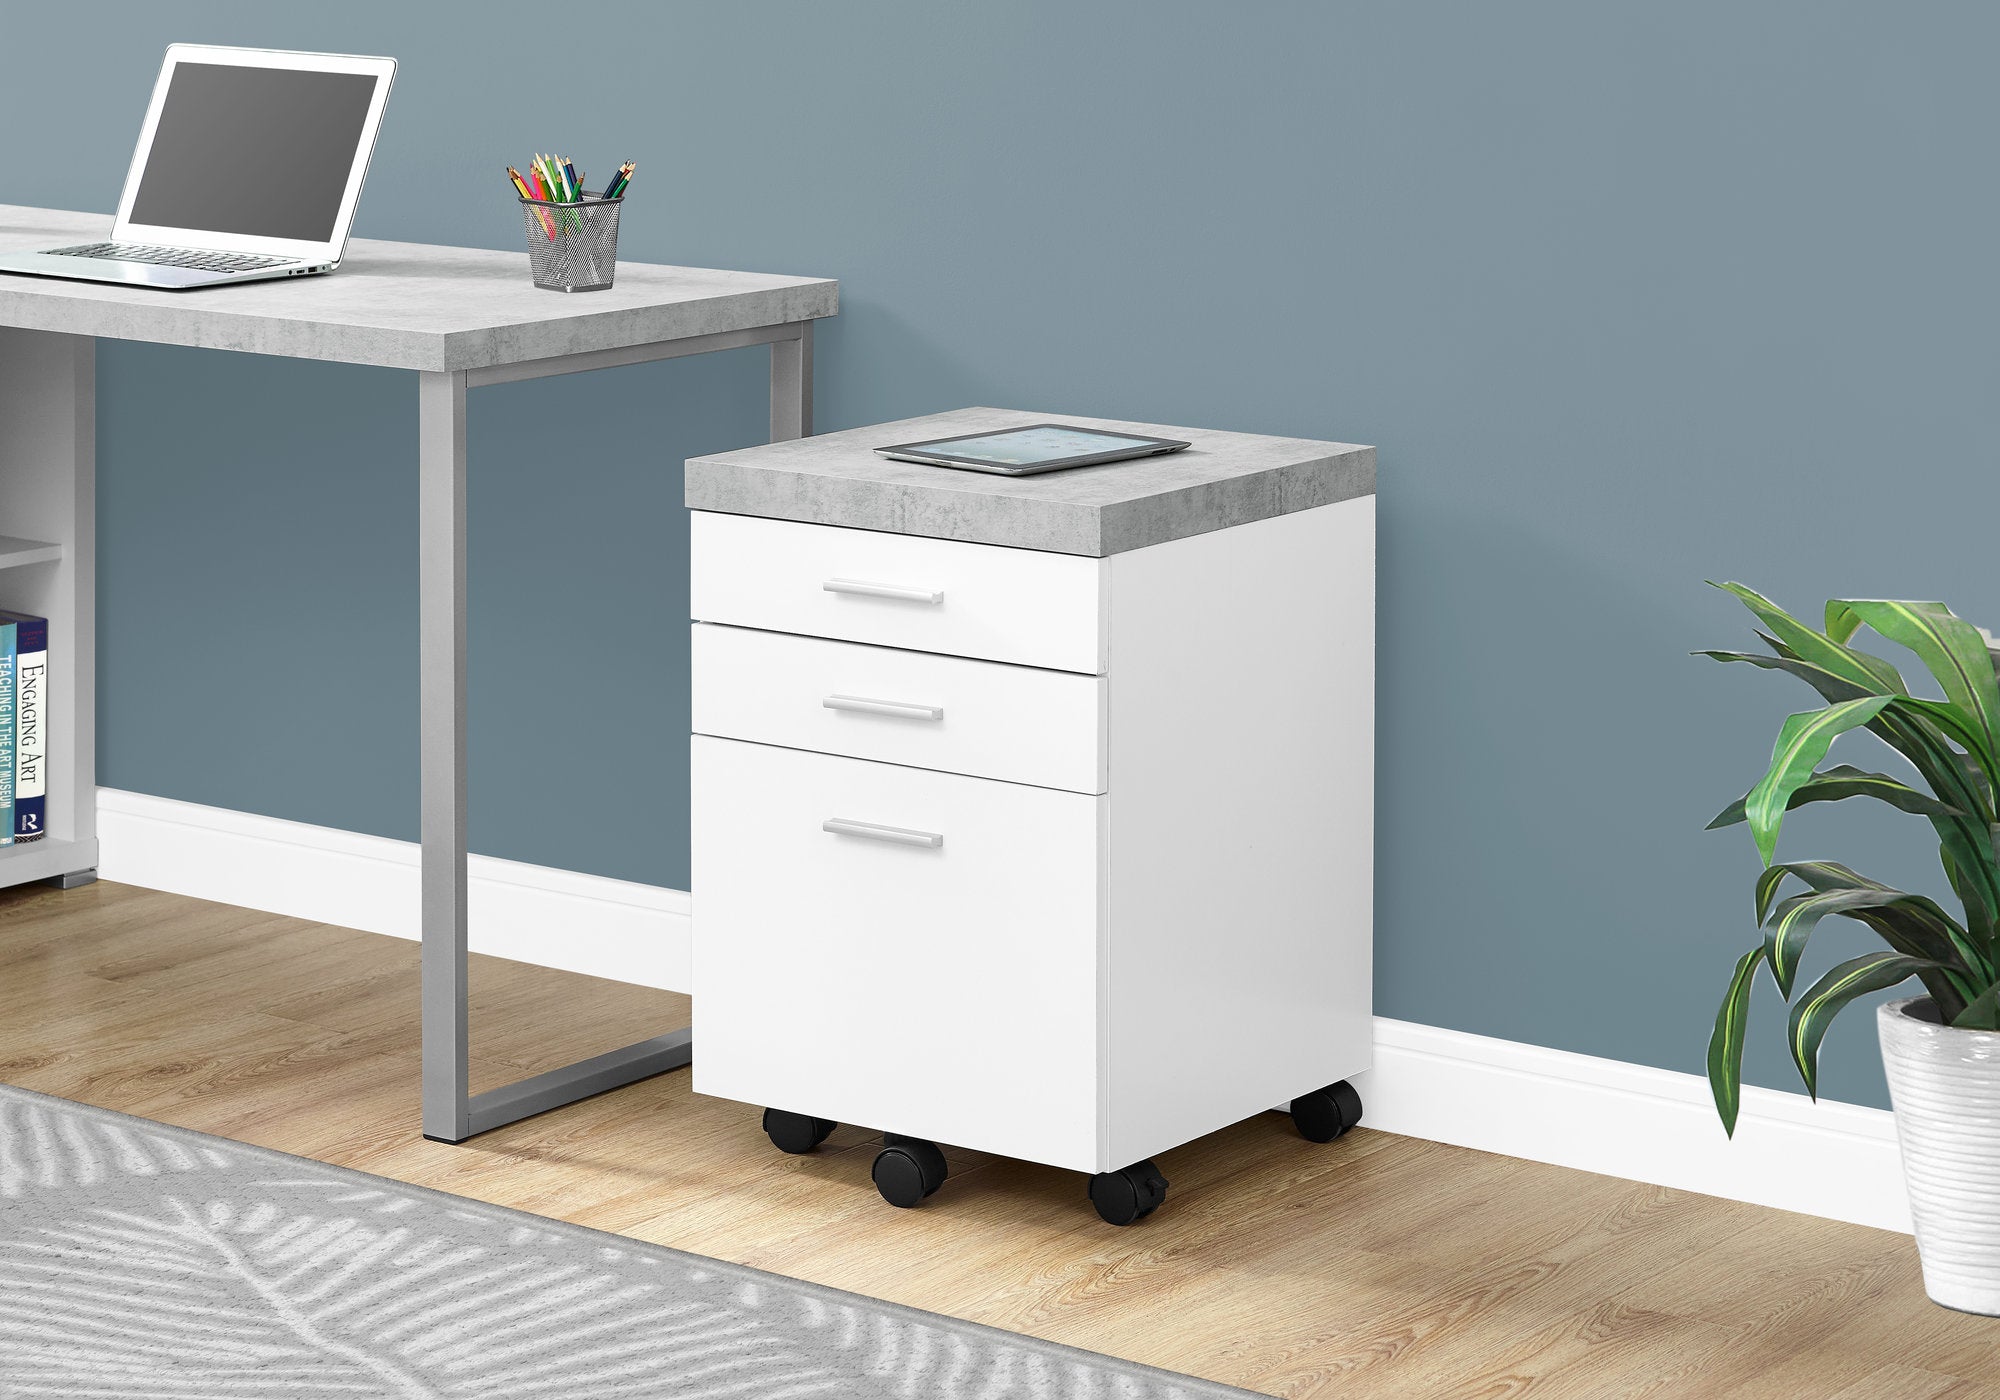 MN-847051    File Cabinet, Rolling Mobile, Storage, Printer Stand, Wood File Cabinet, Office, Mdf, Grey Cement Look, Contemporary, Modern